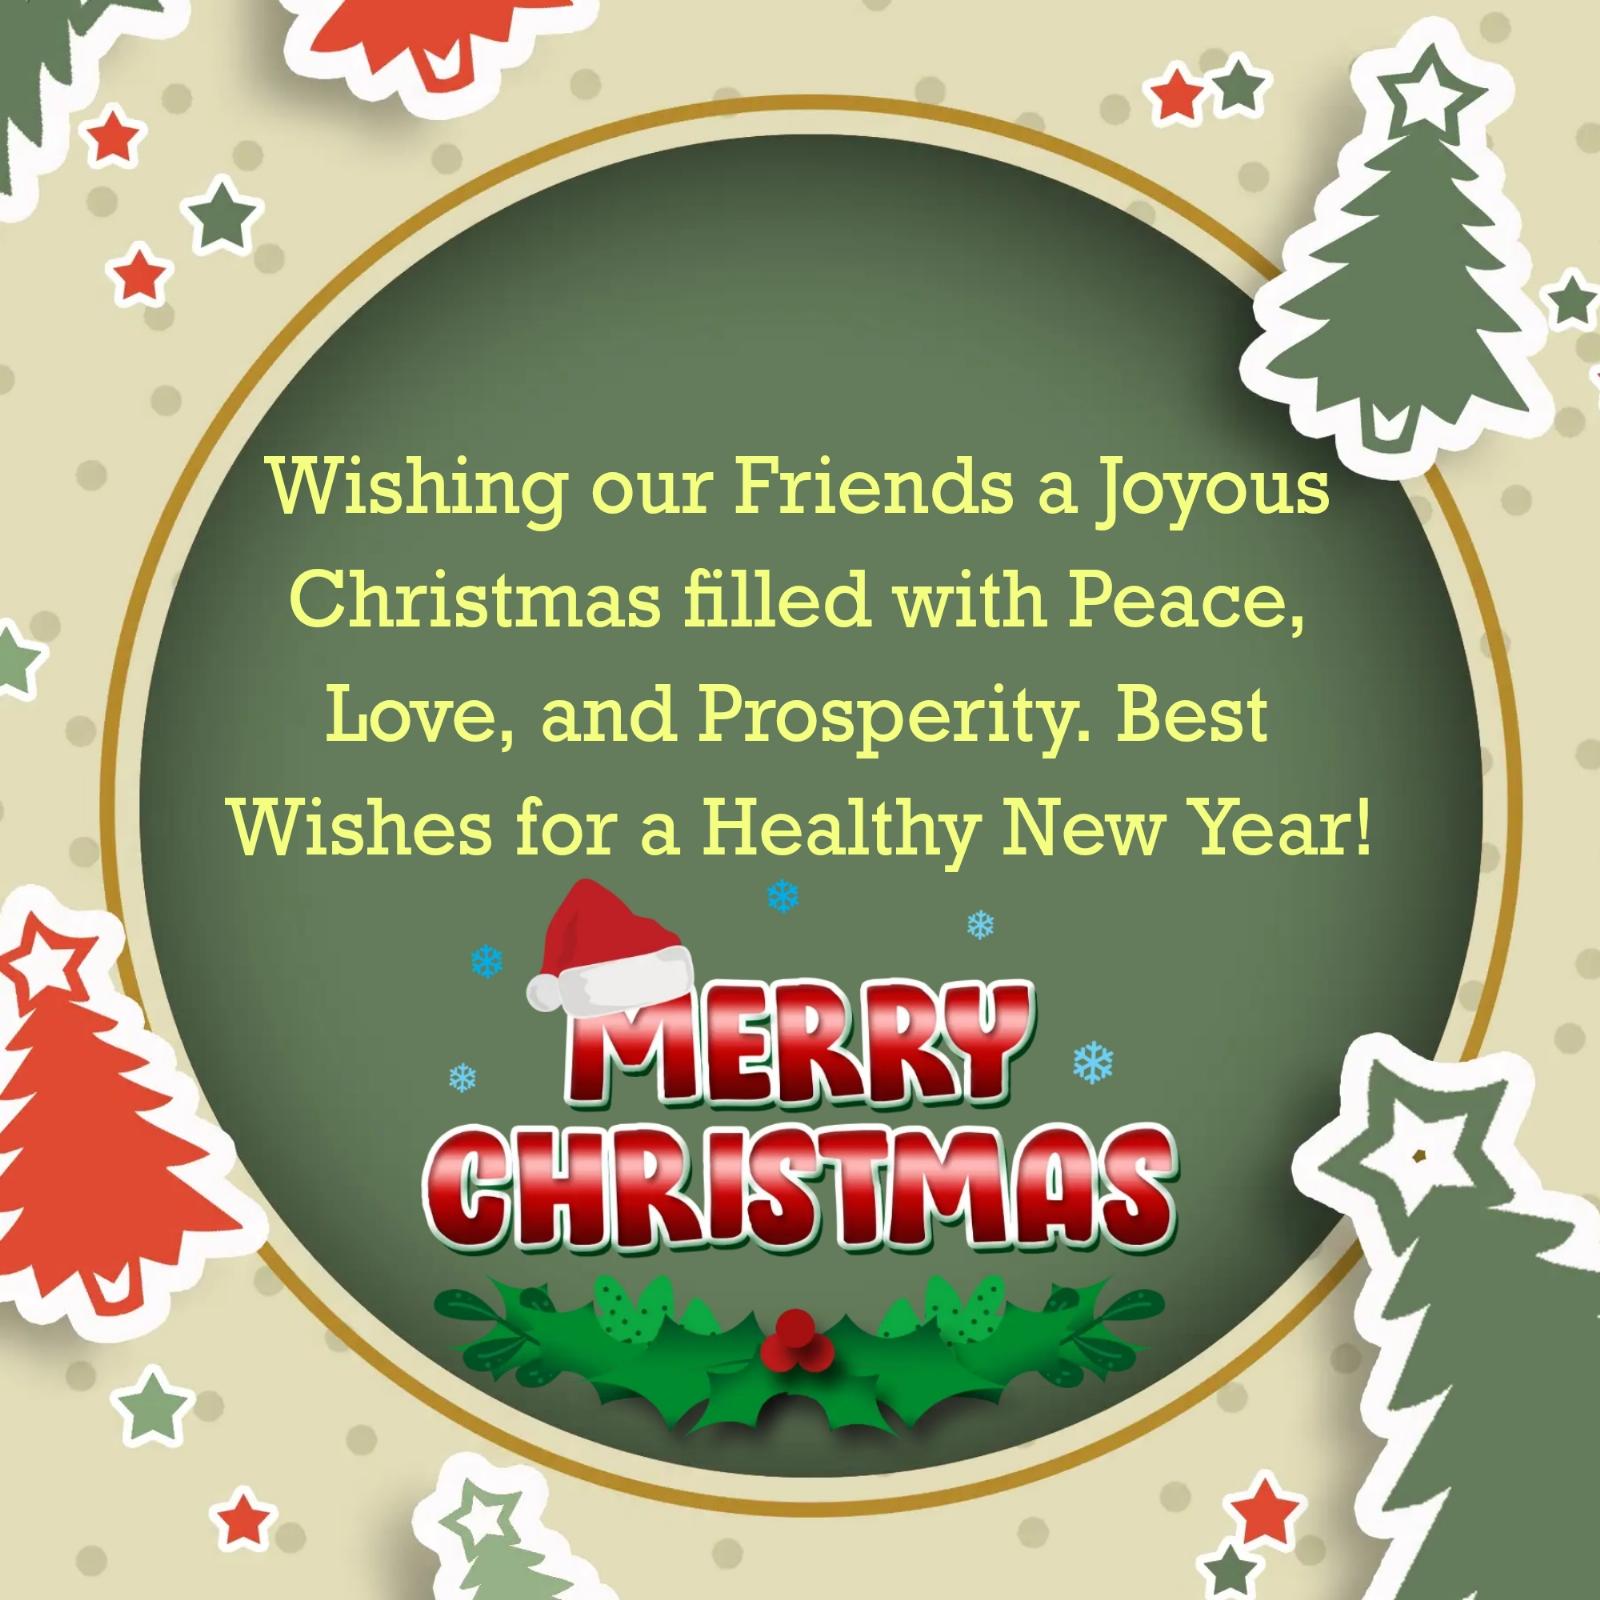 Wishing our Friends a Joyous Christmas filled with Peace